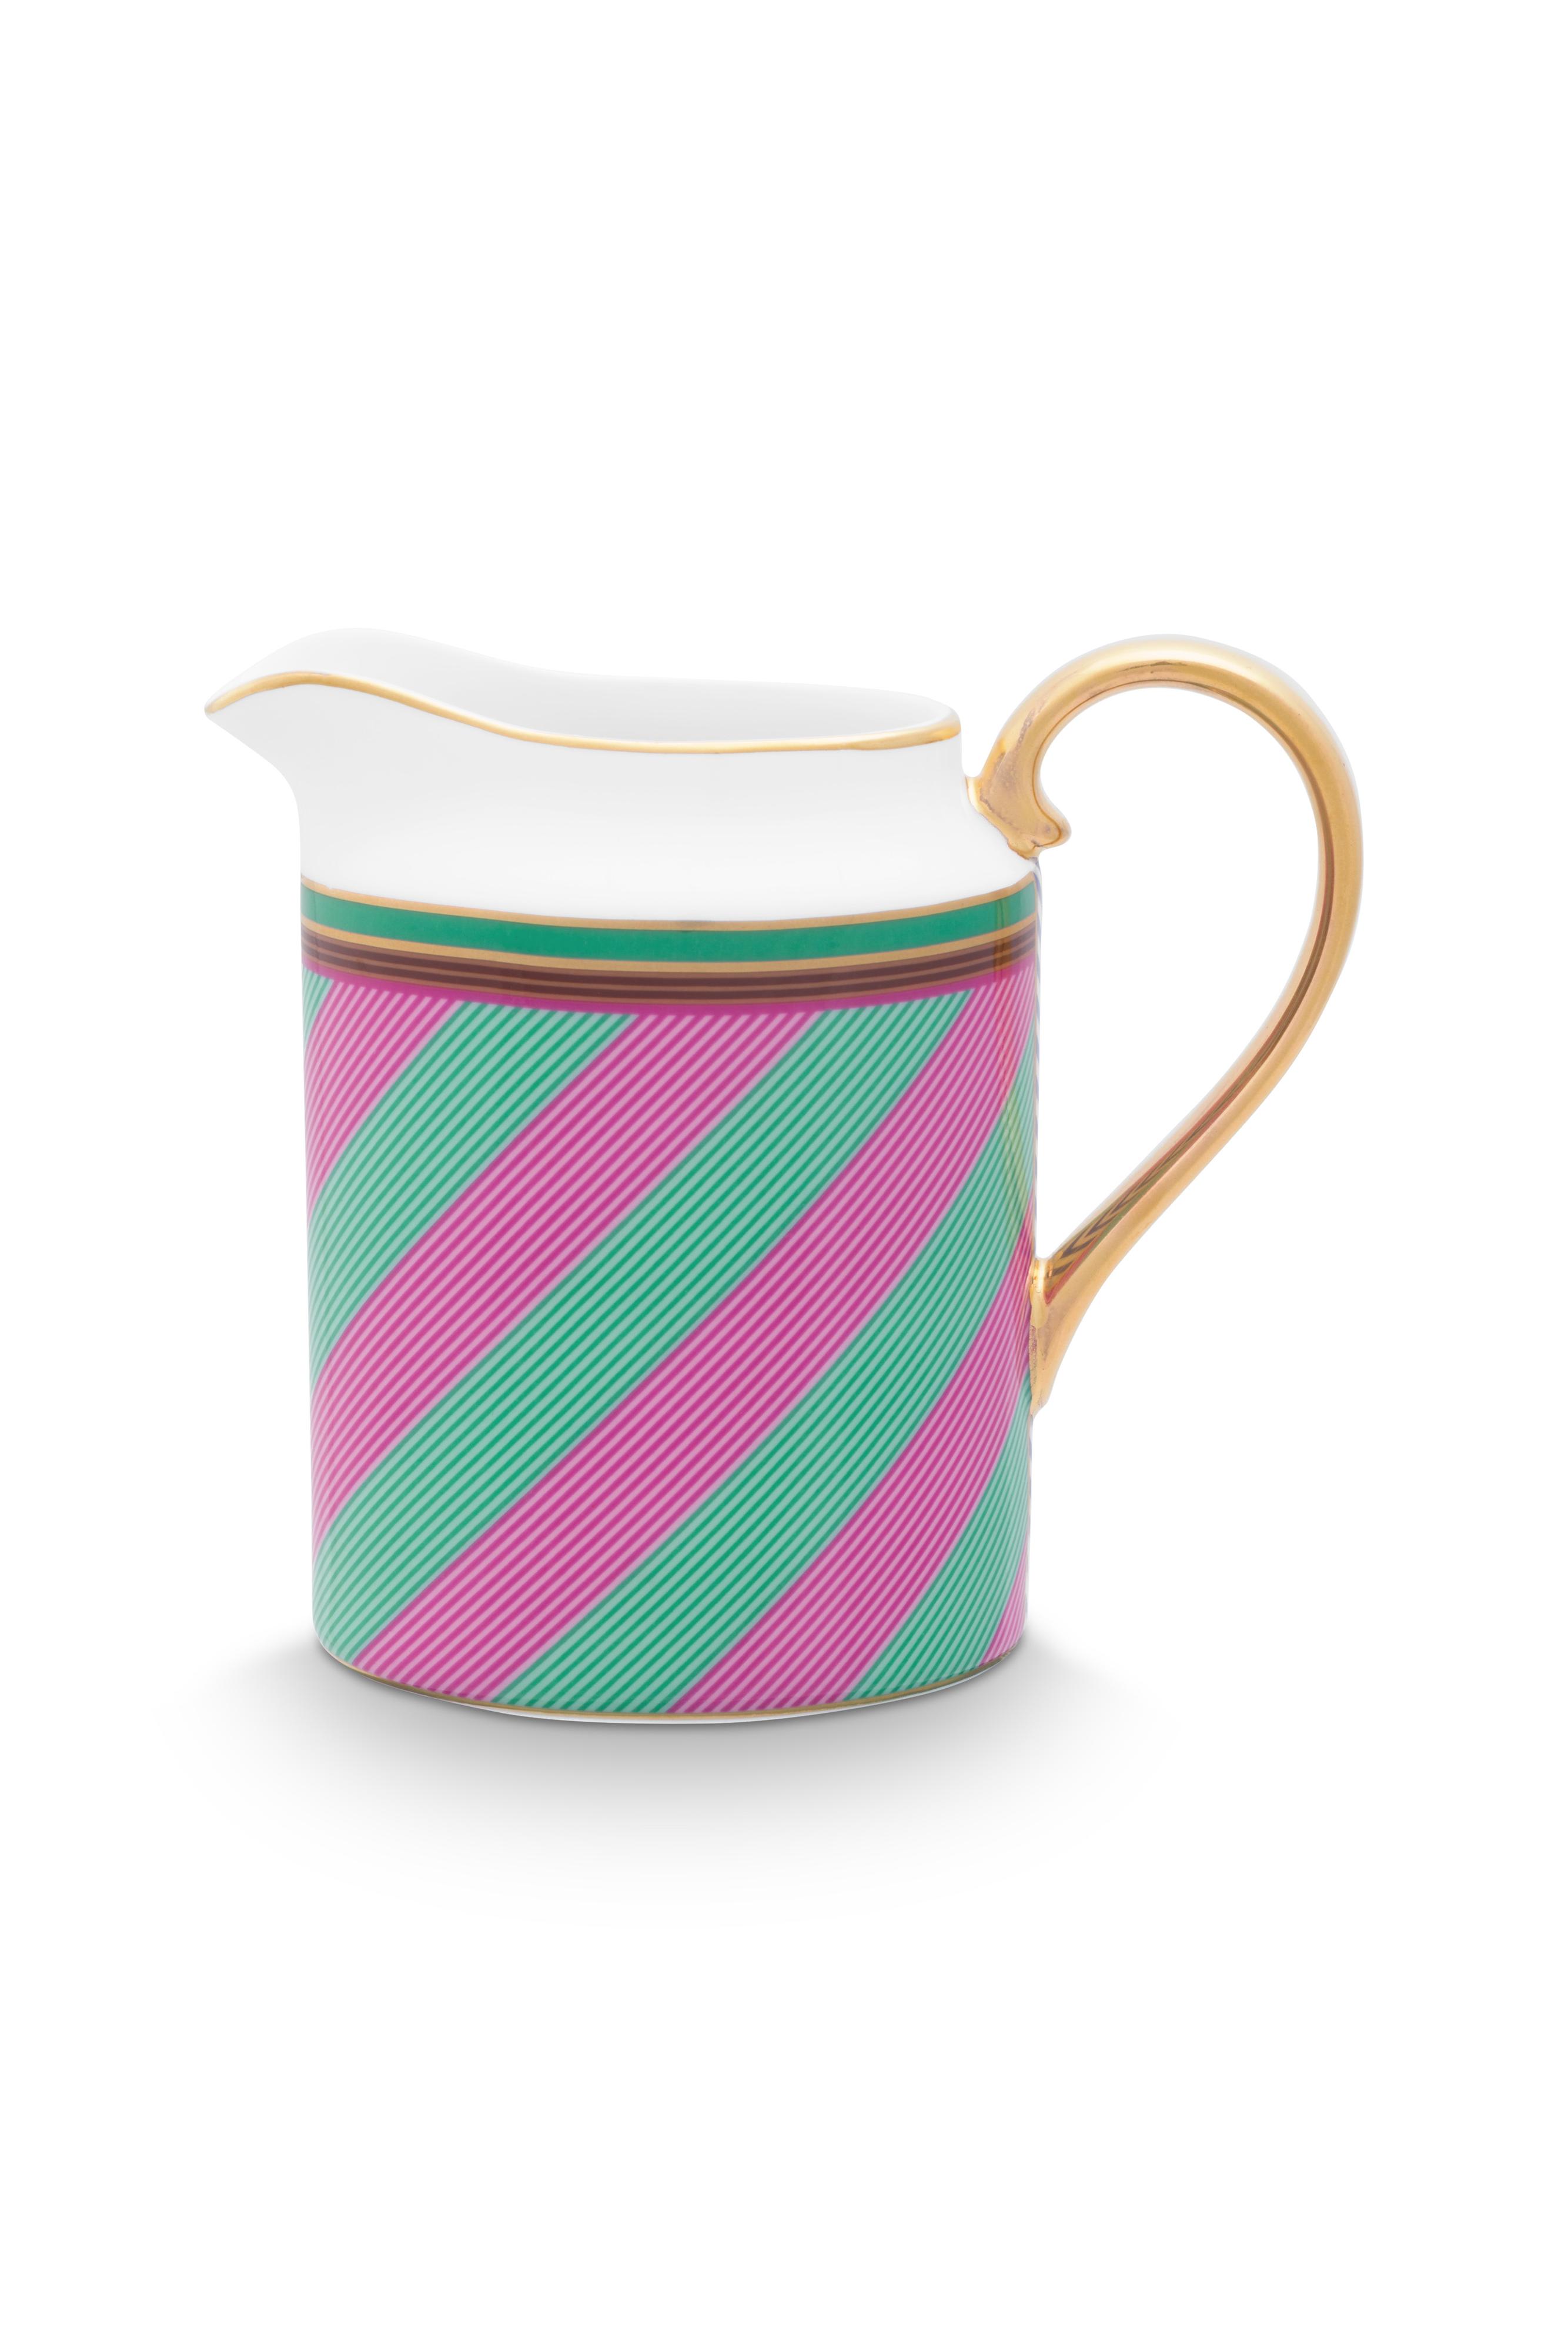 Jug Small Chique Stripes Pink-green 260ml Gift